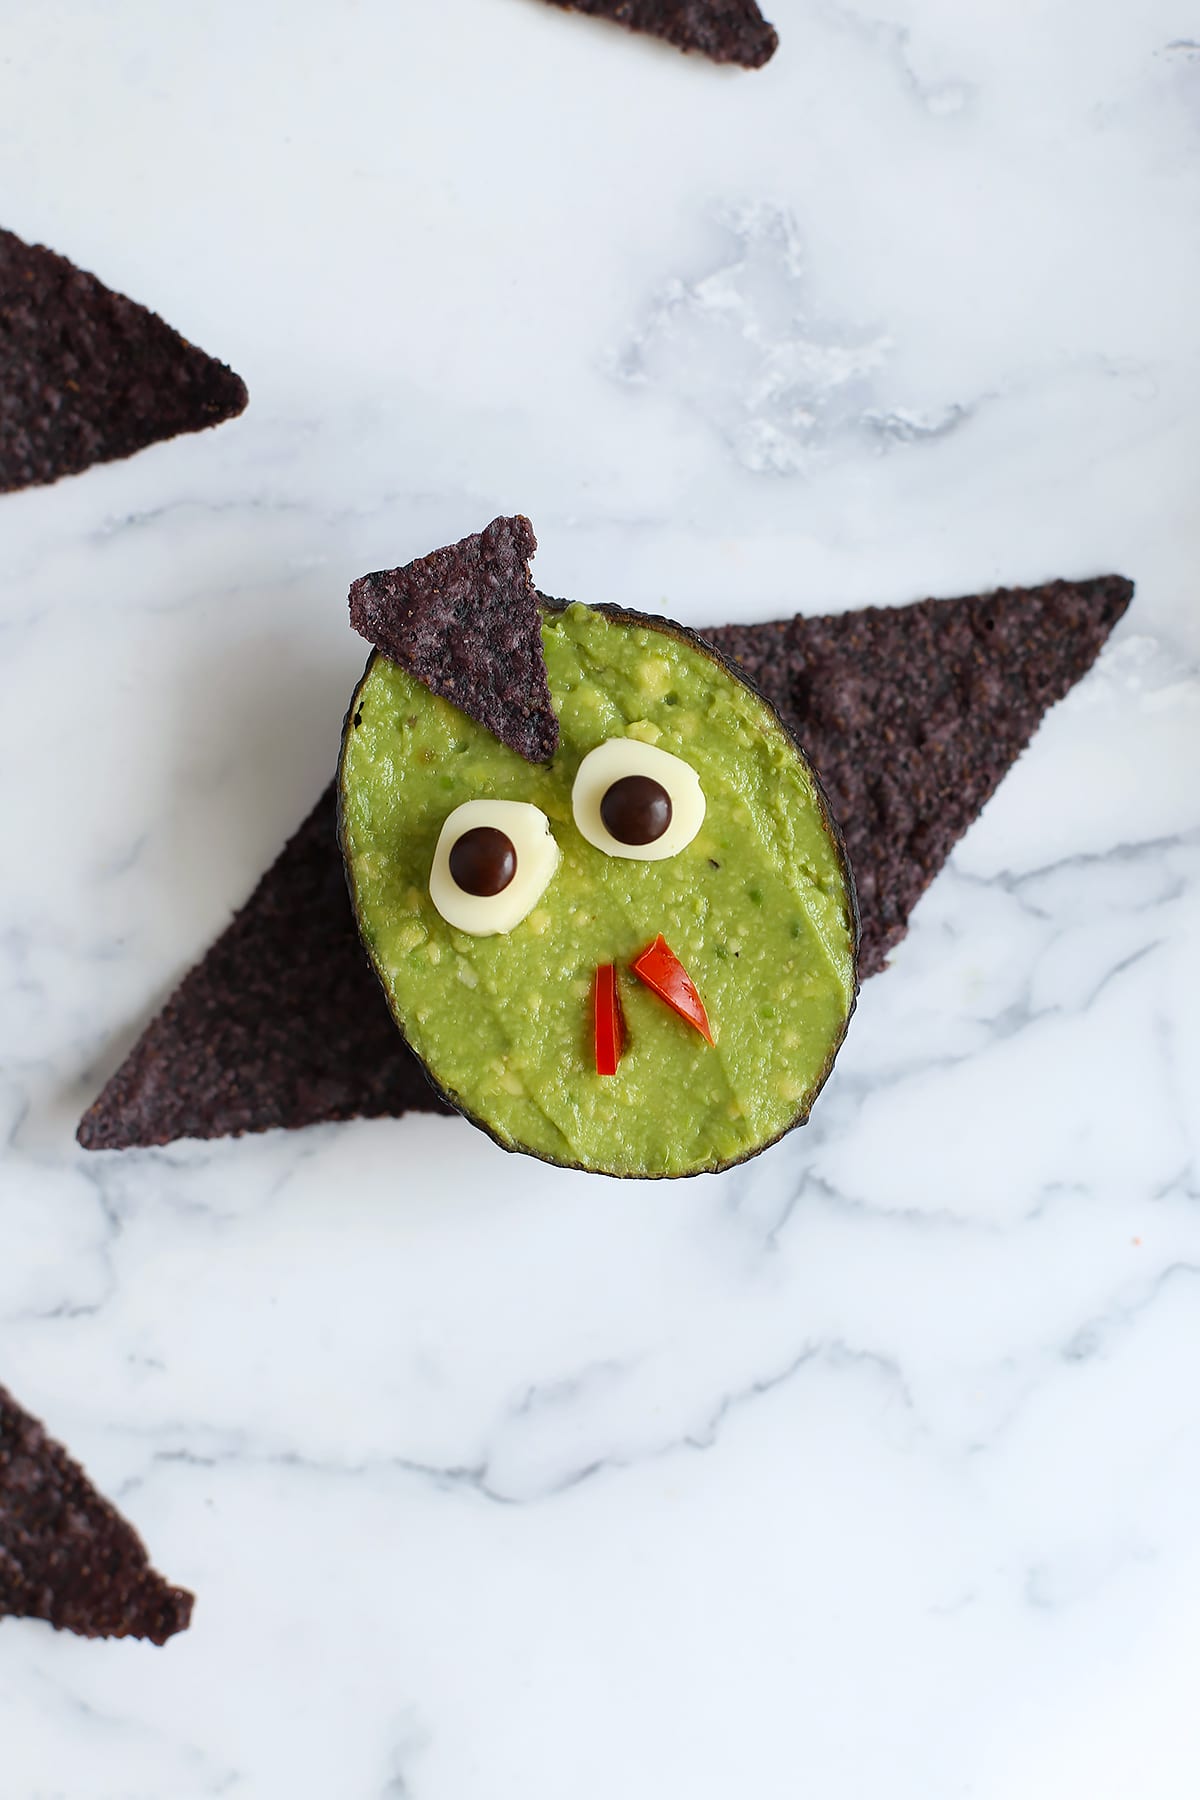 An up close photo of a vampire guacamole cup.